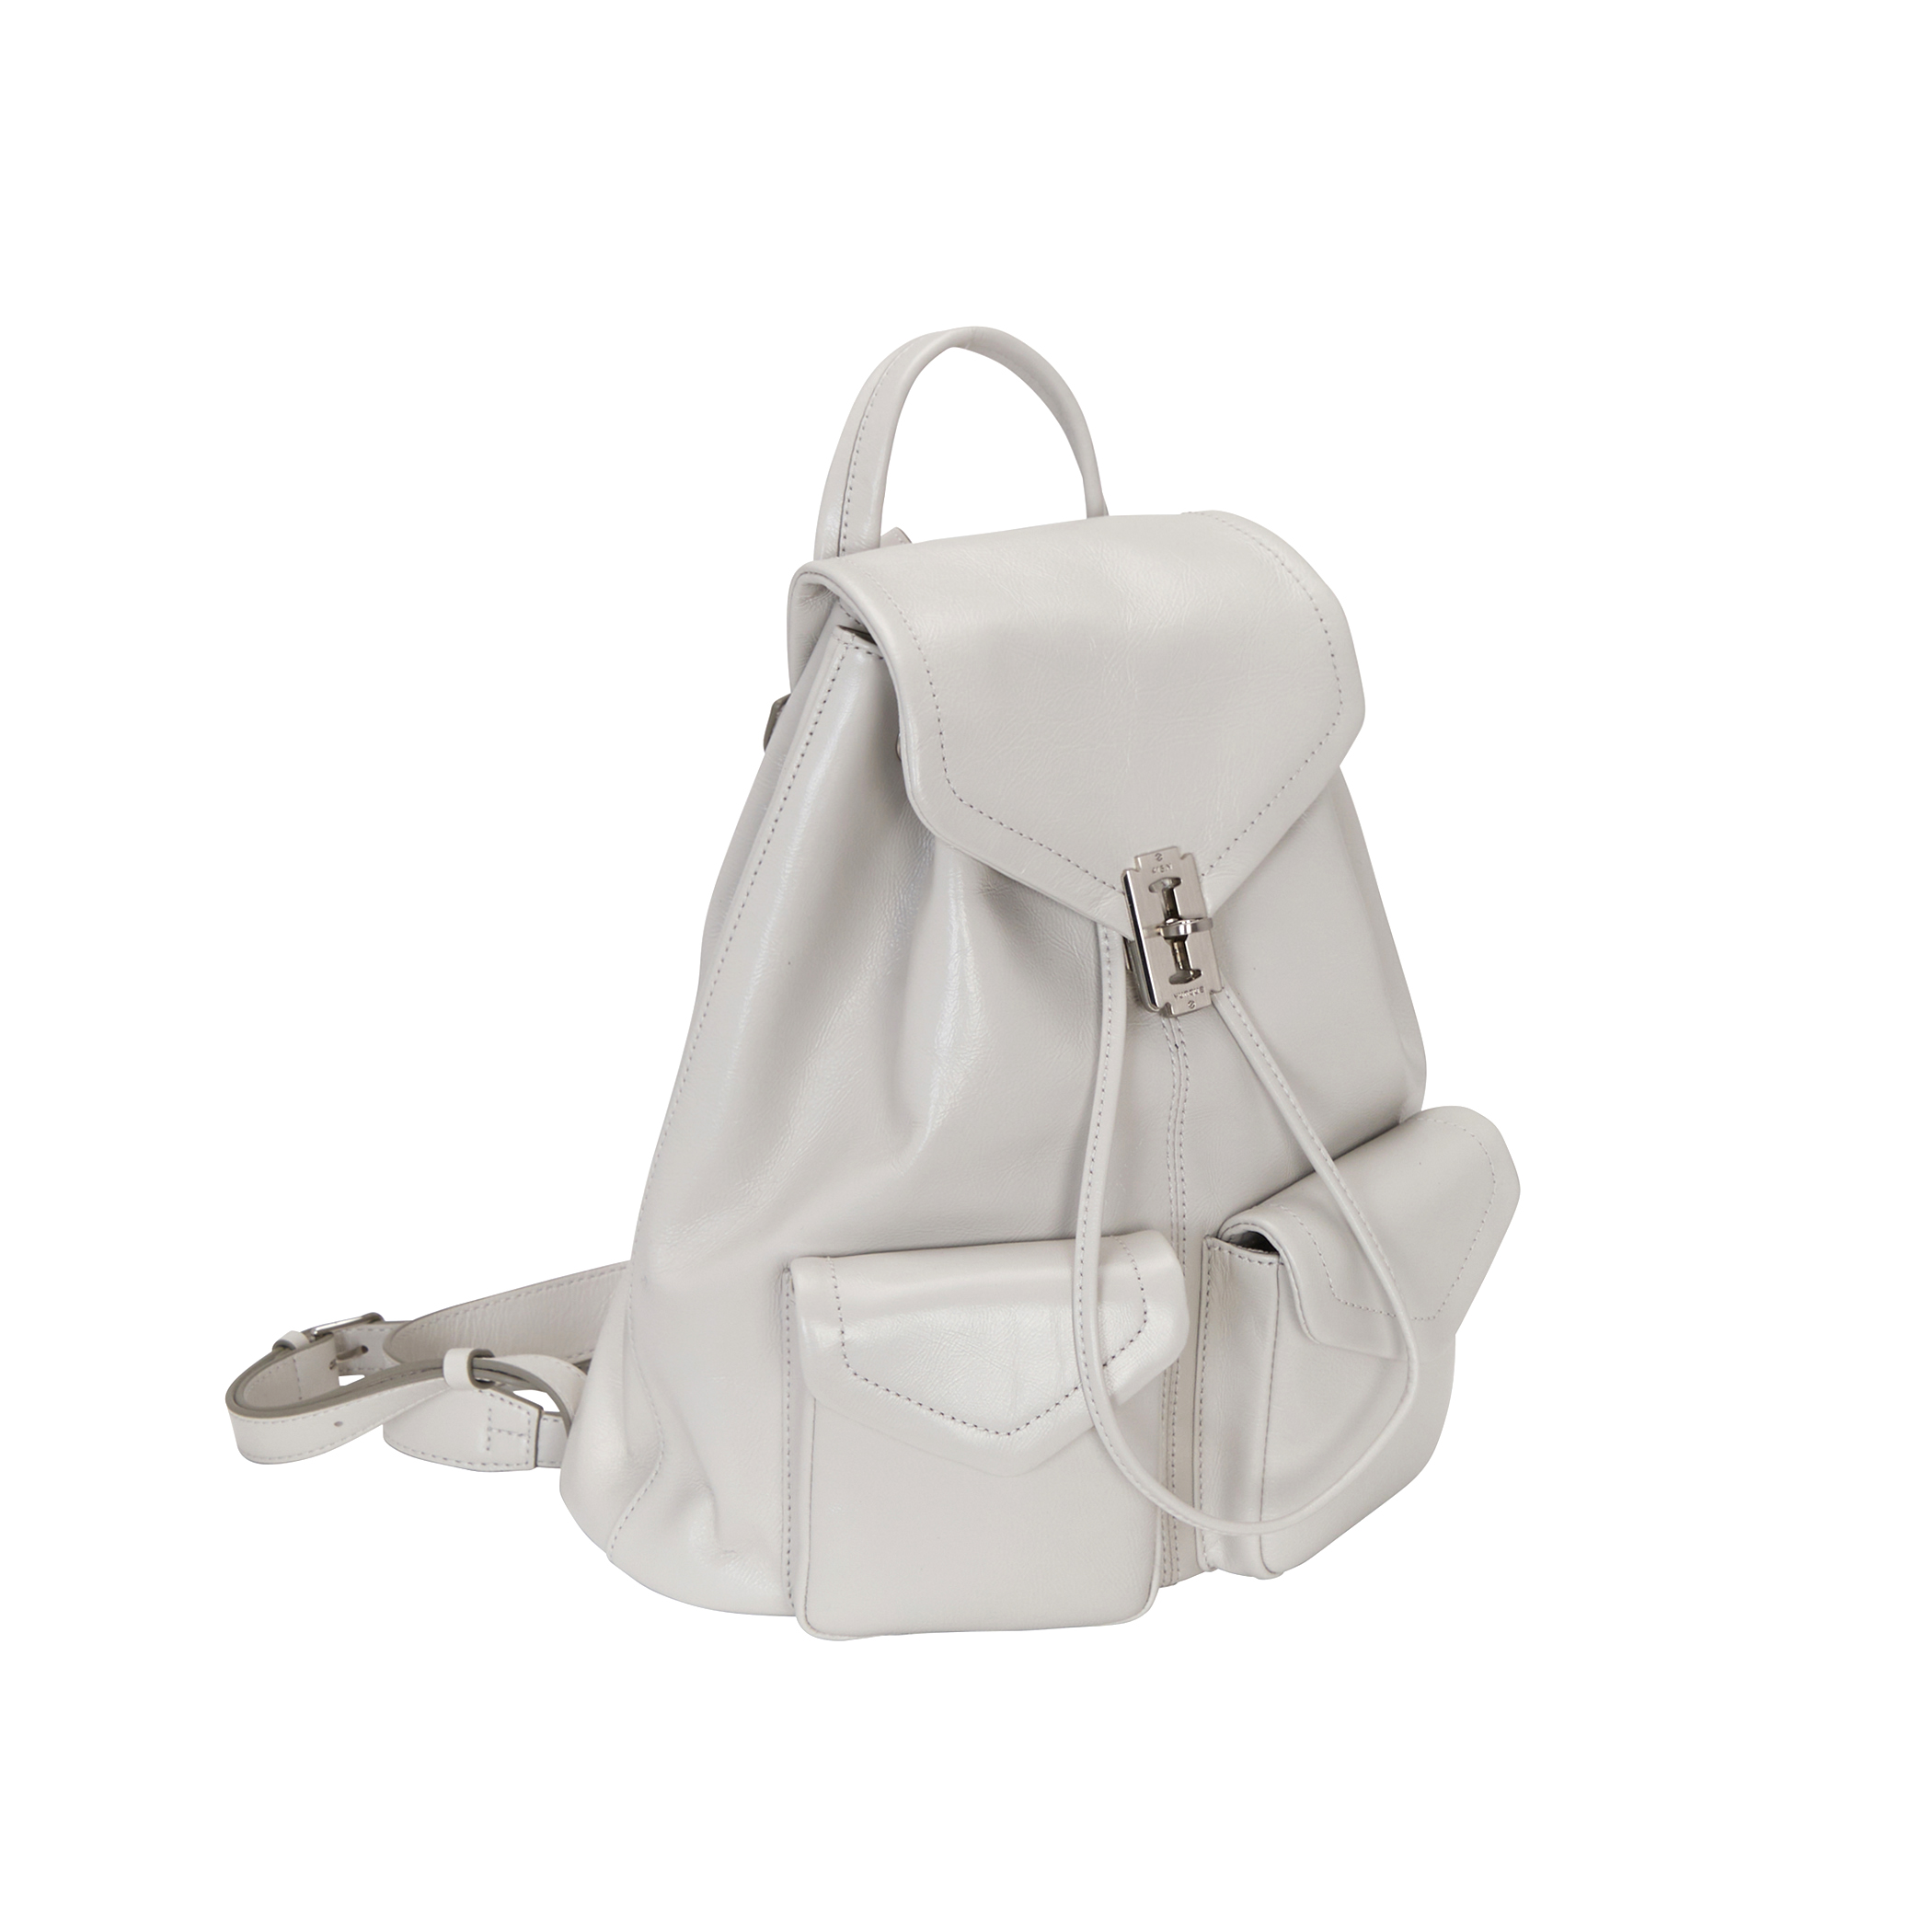 Occam Doux double pocket Backpack M (오캄 두 더블 포켓 백팩 미듐) Light Beige